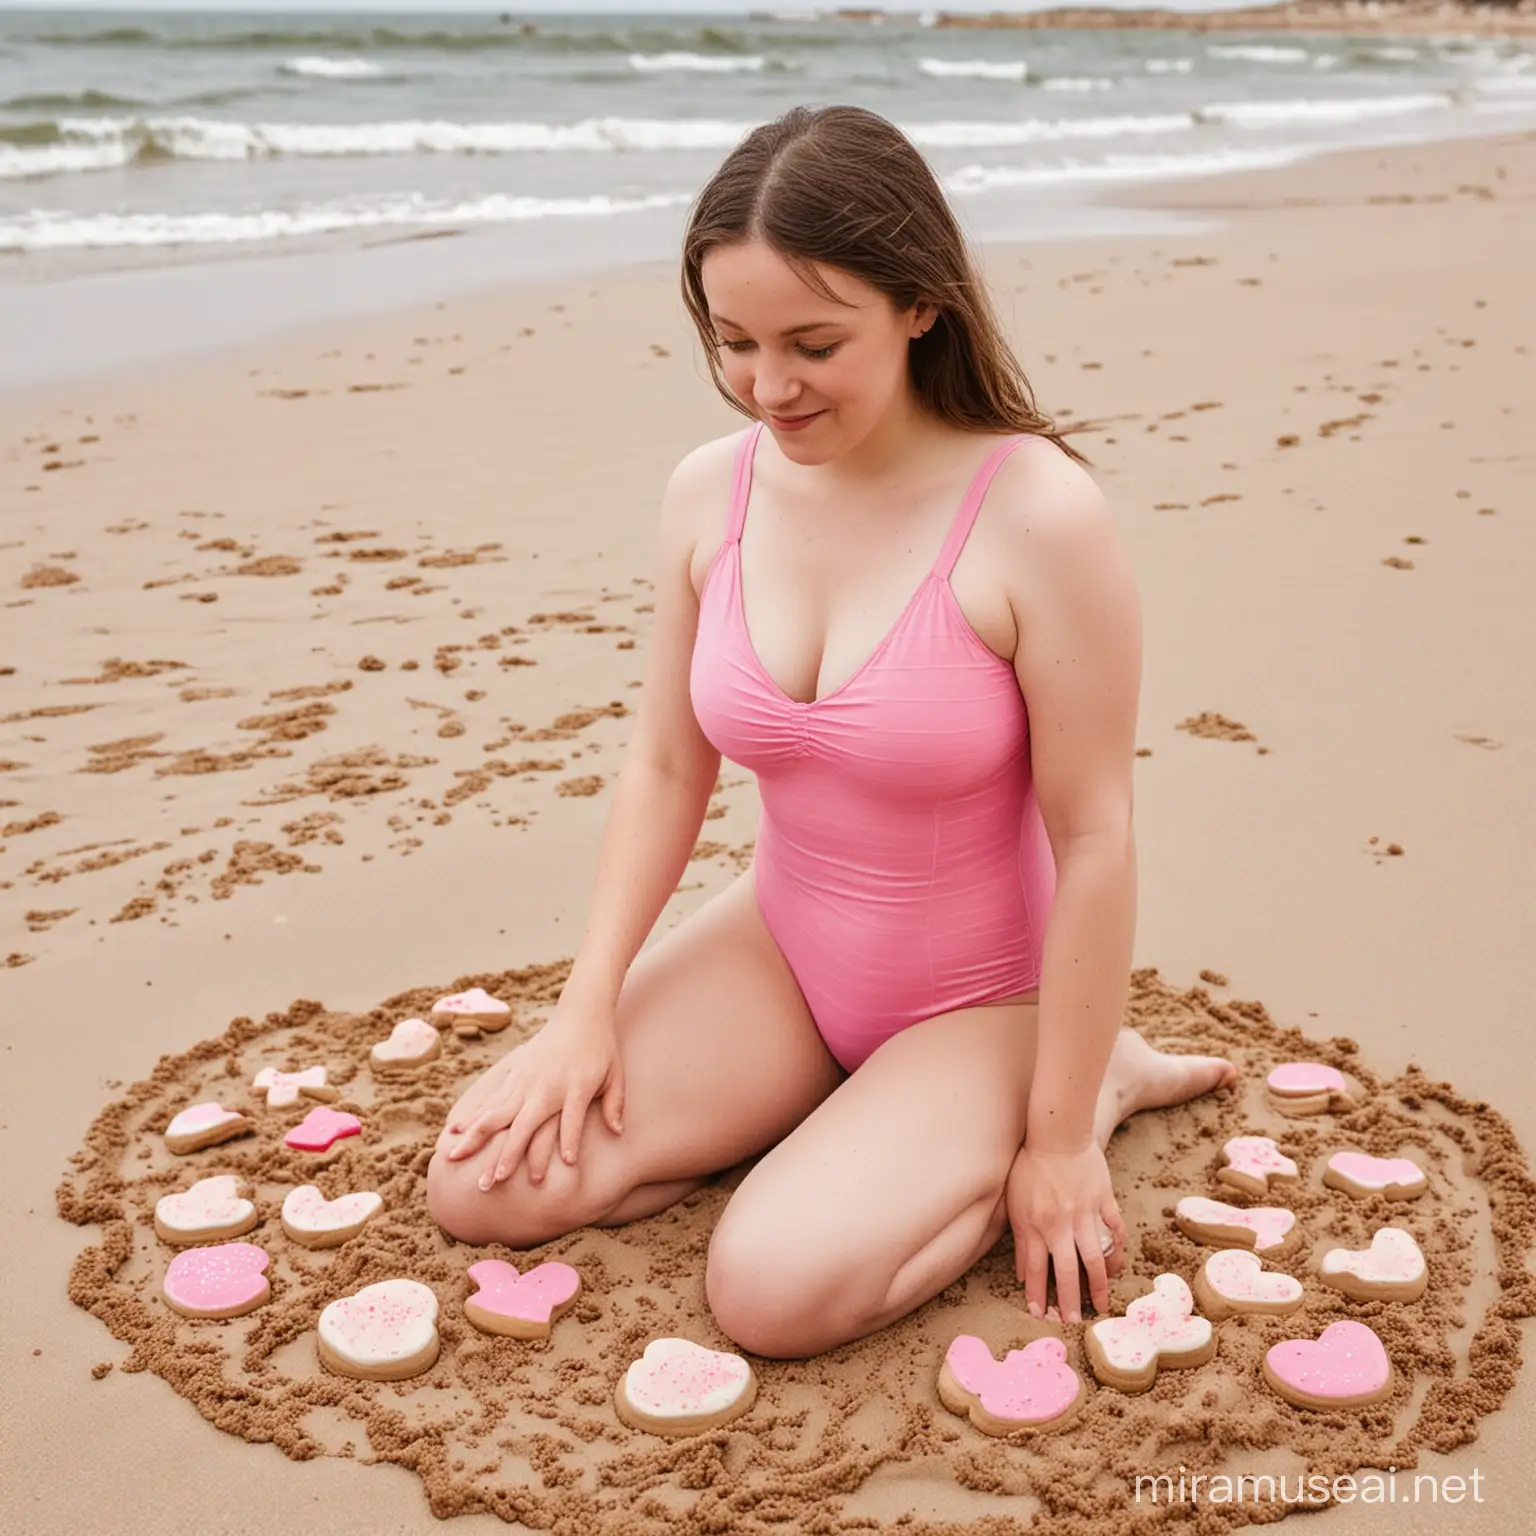 Down Syndrome Woman Making Sand Cakes on Sandy Beach